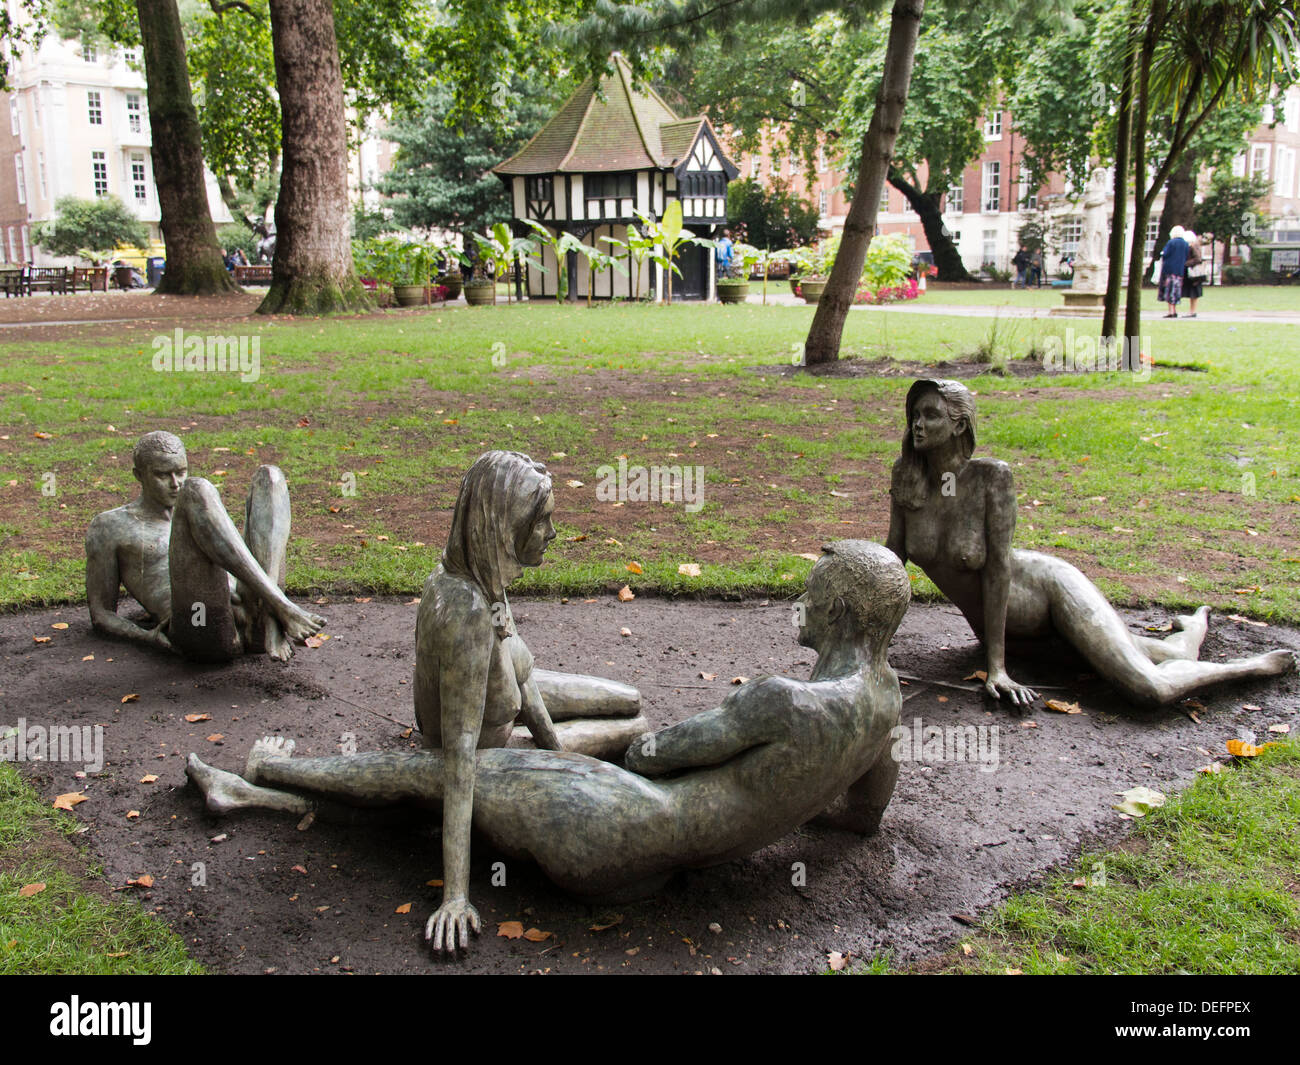 Sculpted group of figures by Bruce Denny in Soho Square, London 3 Stock Photo